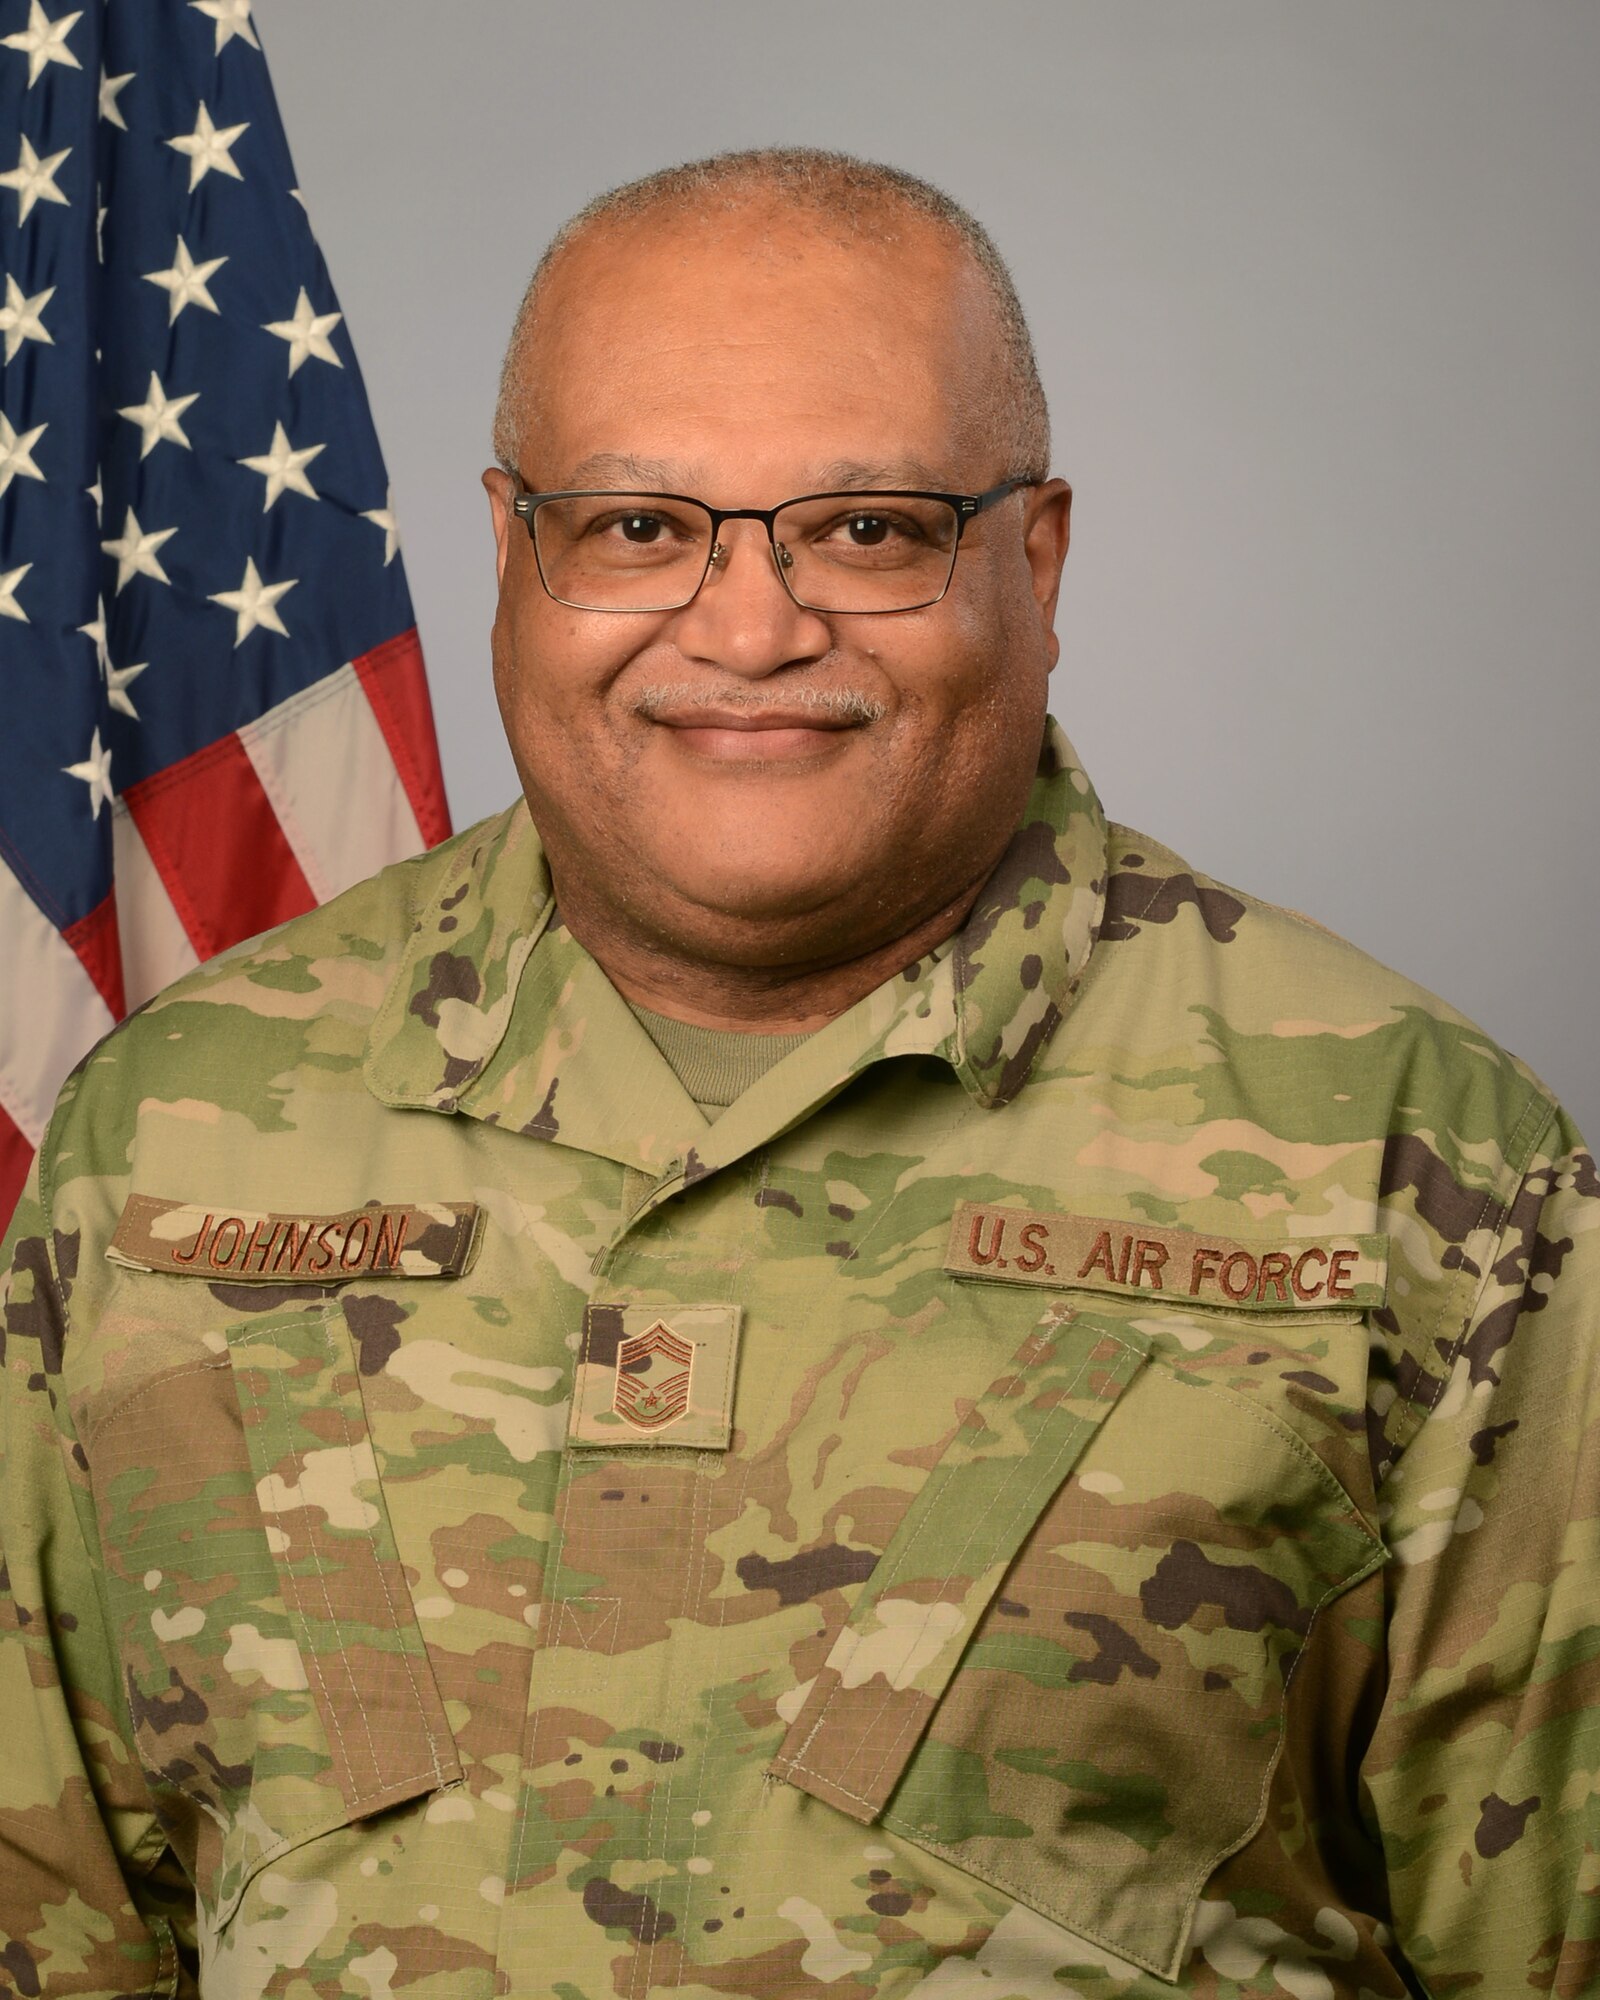 U.S. Air Force Chief Master Sgt. Marcus Johnson, 169th Communications Squadron superintendent, August 12, 2021. (U.S. Air National Guard photo by Lt. Col. James St. Clair, 169th Fighter Wing Public Affairs)